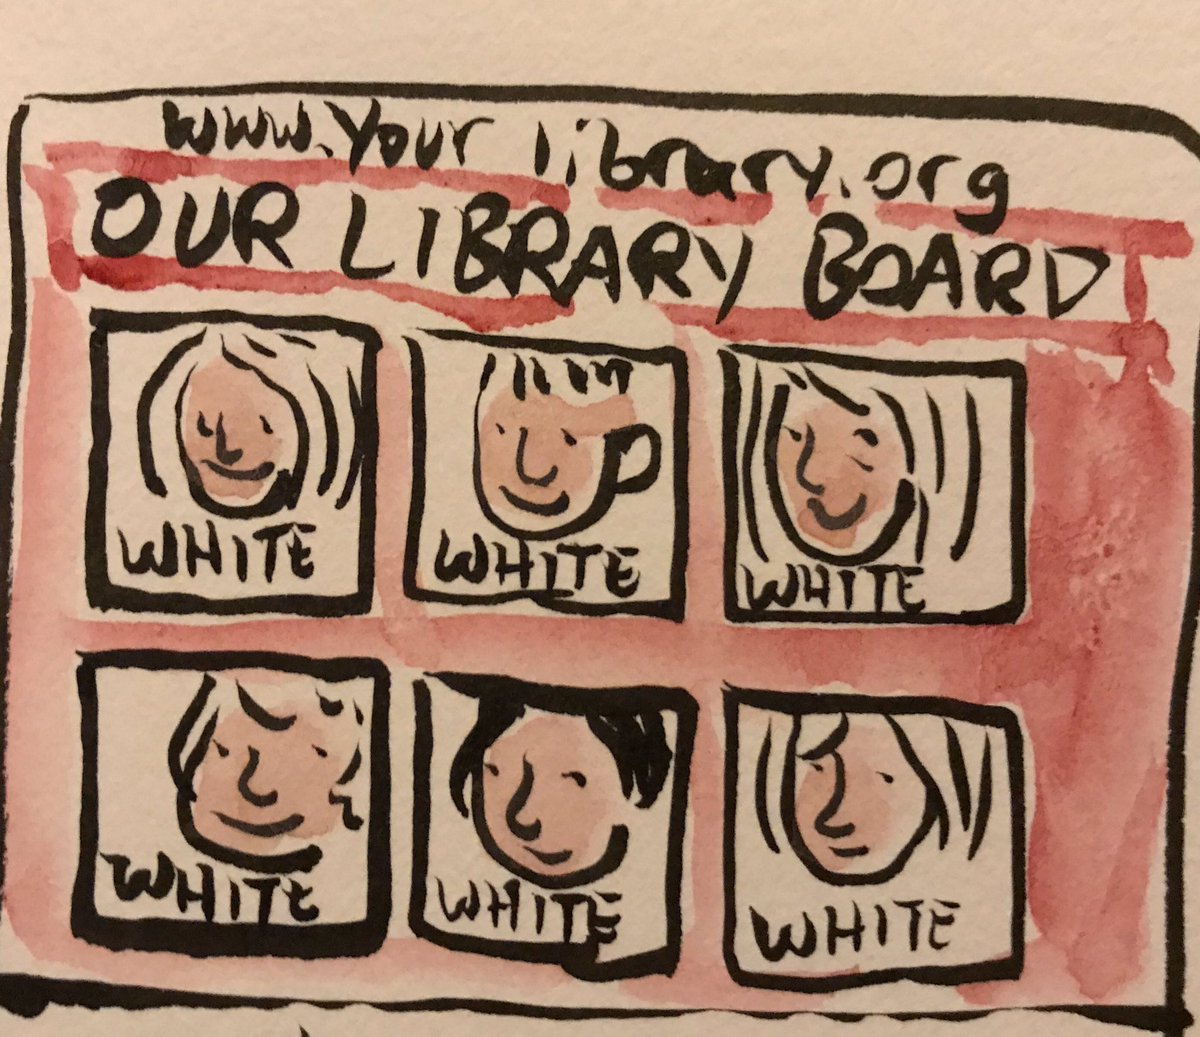 Value #3: we ask our institutions to reckon with the effects of policing in libraries and confront white supremacy past and present in libraries.